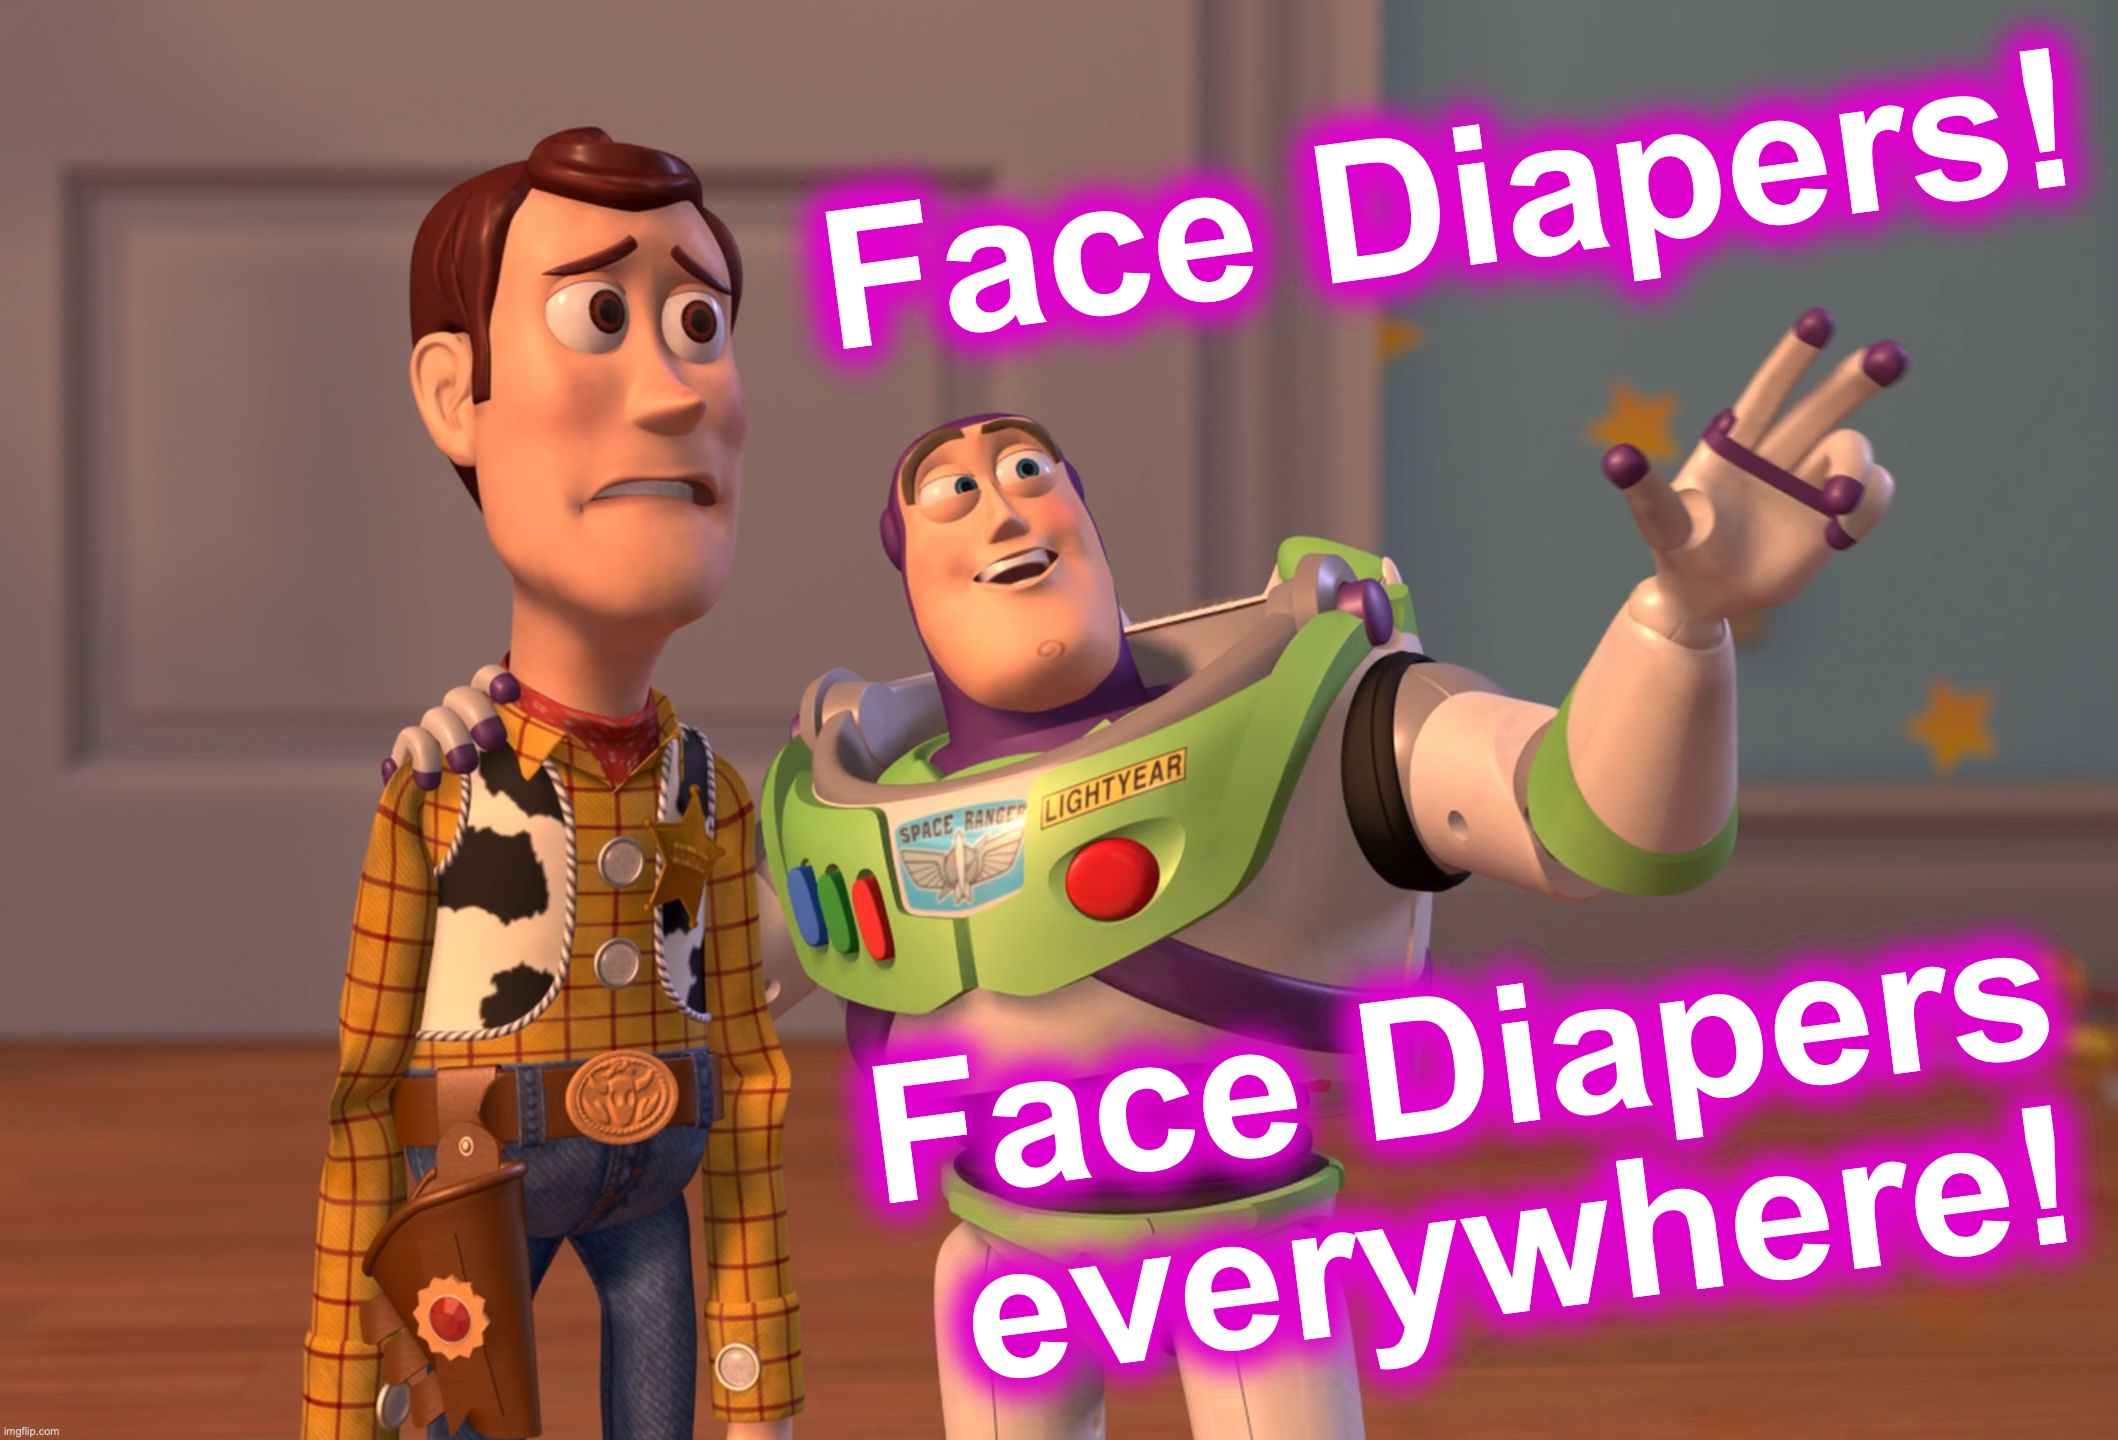 X, X Everywhere | Face Diapers! Face Diapers everywhere! | image tagged in x x everywhere,diapers,face,masks | made w/ Imgflip meme maker